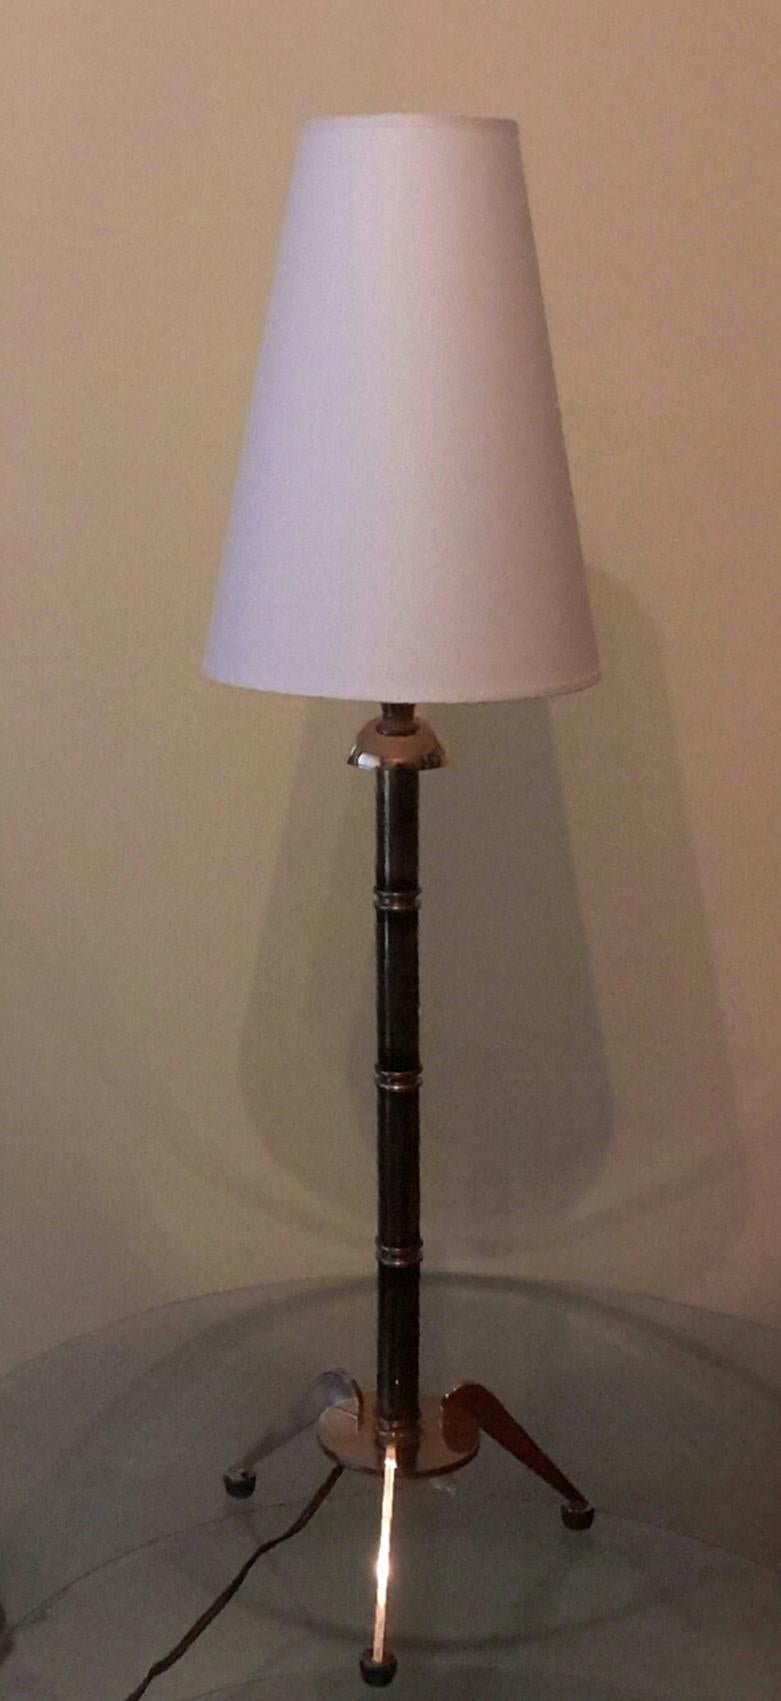 Rare beautiful Art Deco bronze table lamp with brown patina and tripod legs by Maison Jansen, France, 1950s.
The lamp is in a very good condition, the lampshade is new in ivory cotton.
The electrical part is revised and fits the US standards.